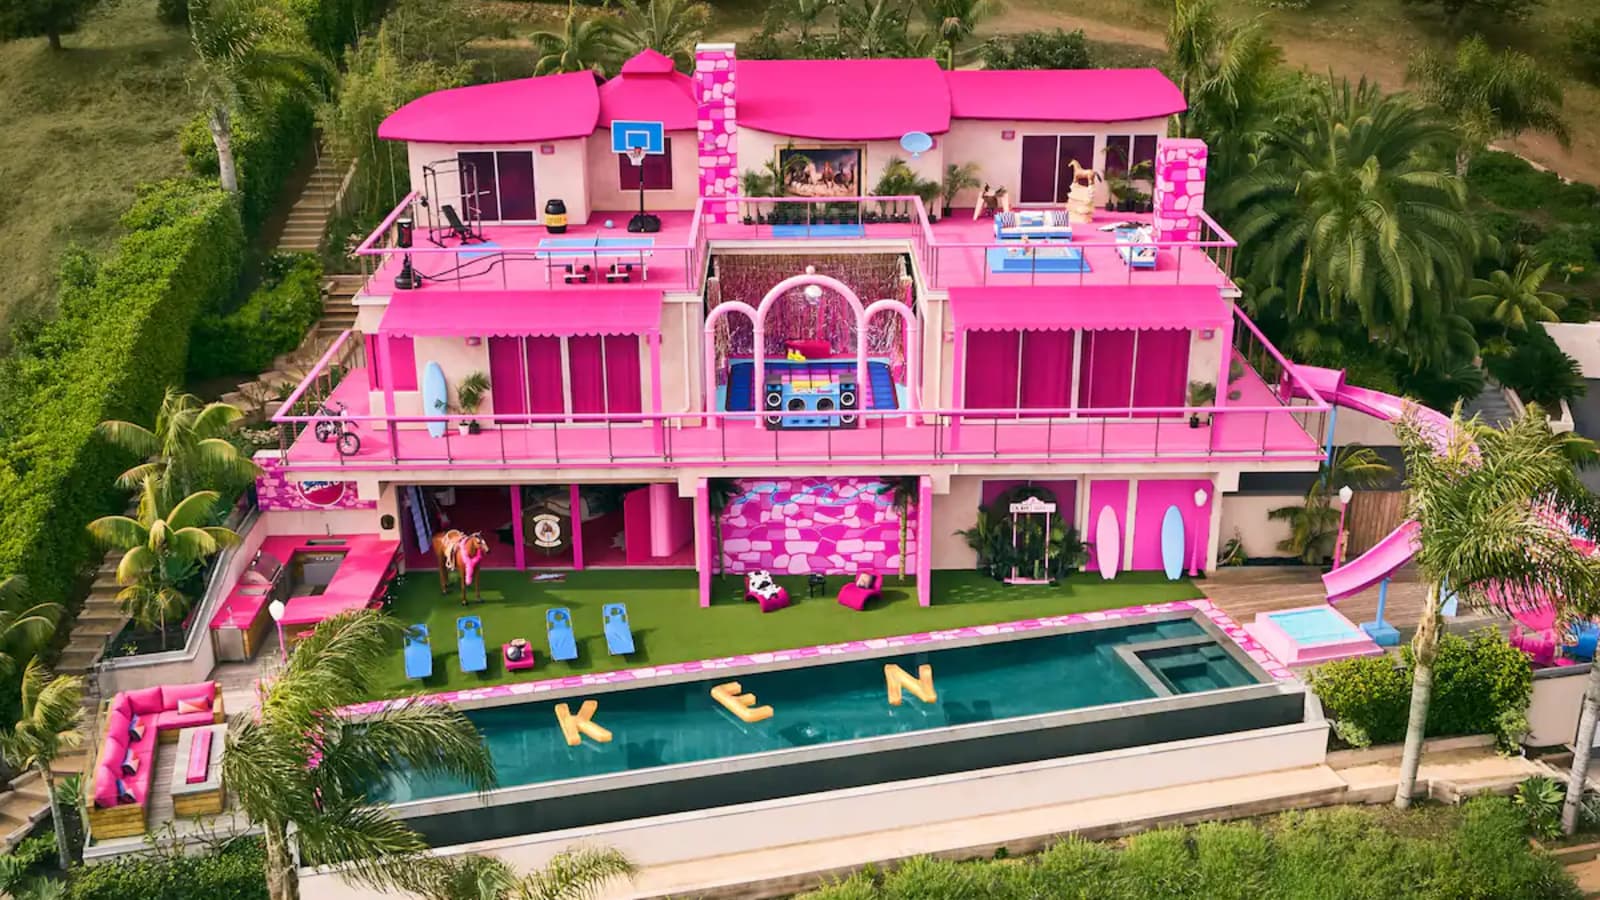 Airbnb is offering a free stay at Barbie's Malibu Dreamhouse